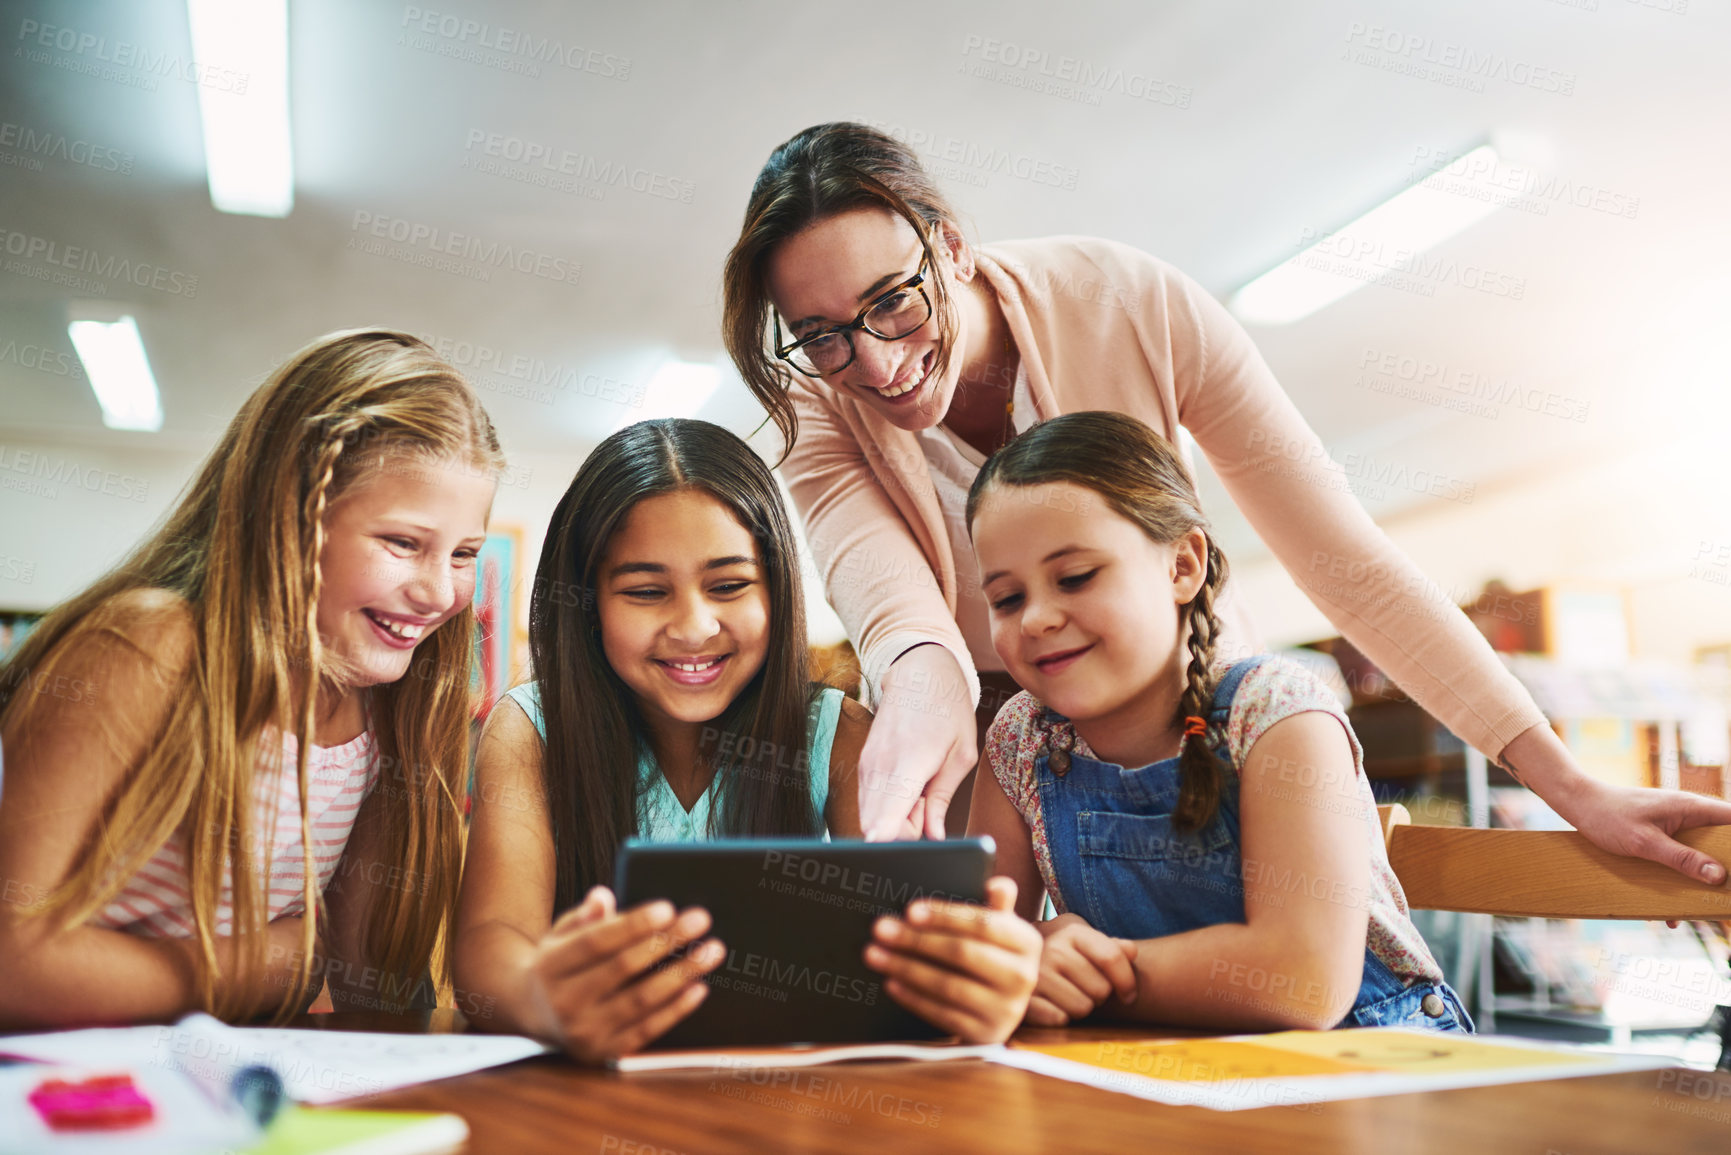 Buy stock photo Shot of a group of cheerful young school girls working together in a classroom with a digital tablet while being assisted by their teacher at school